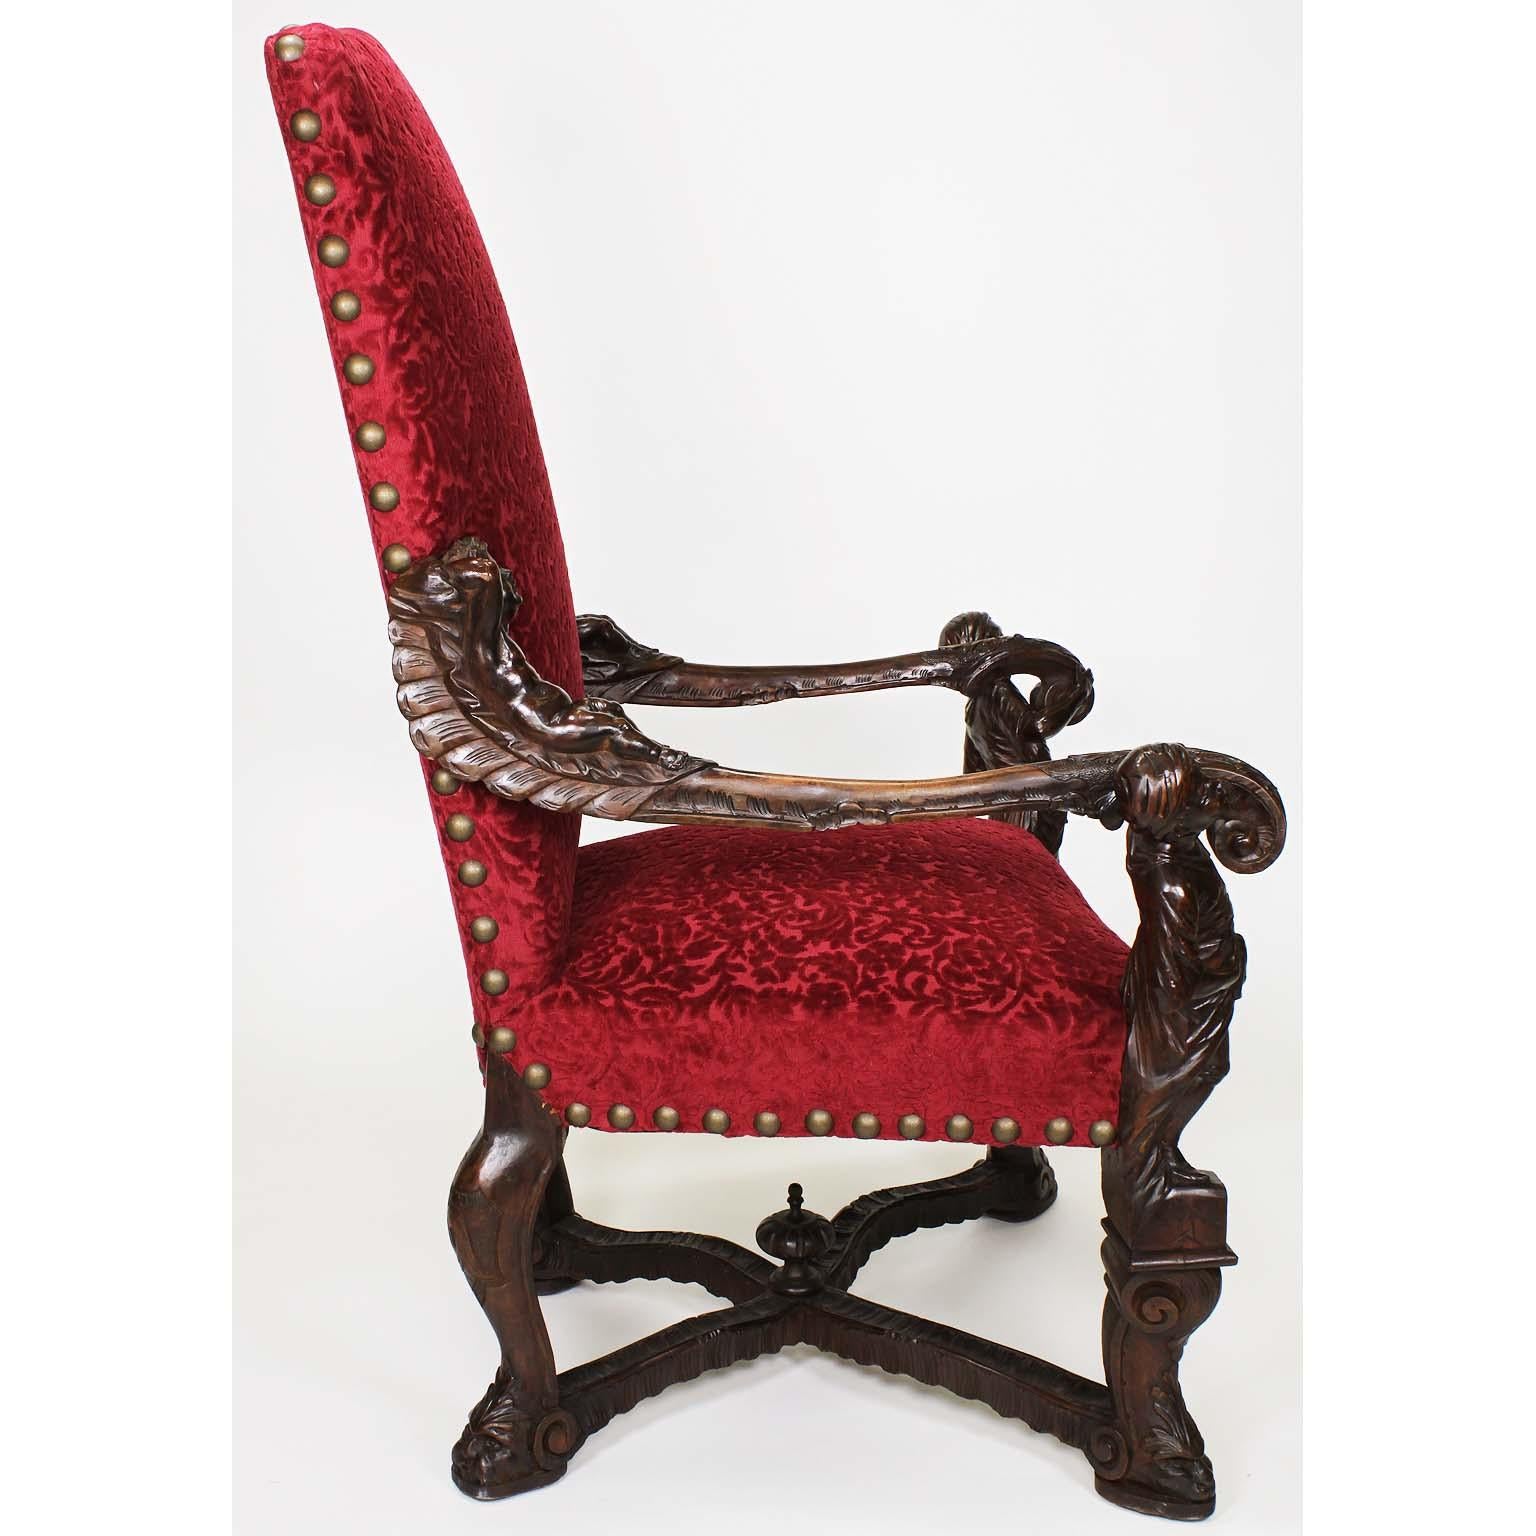 In Manner of Andrea Brustolon Venetian 19th Century Carved Walnut Figural Throne For Sale 6